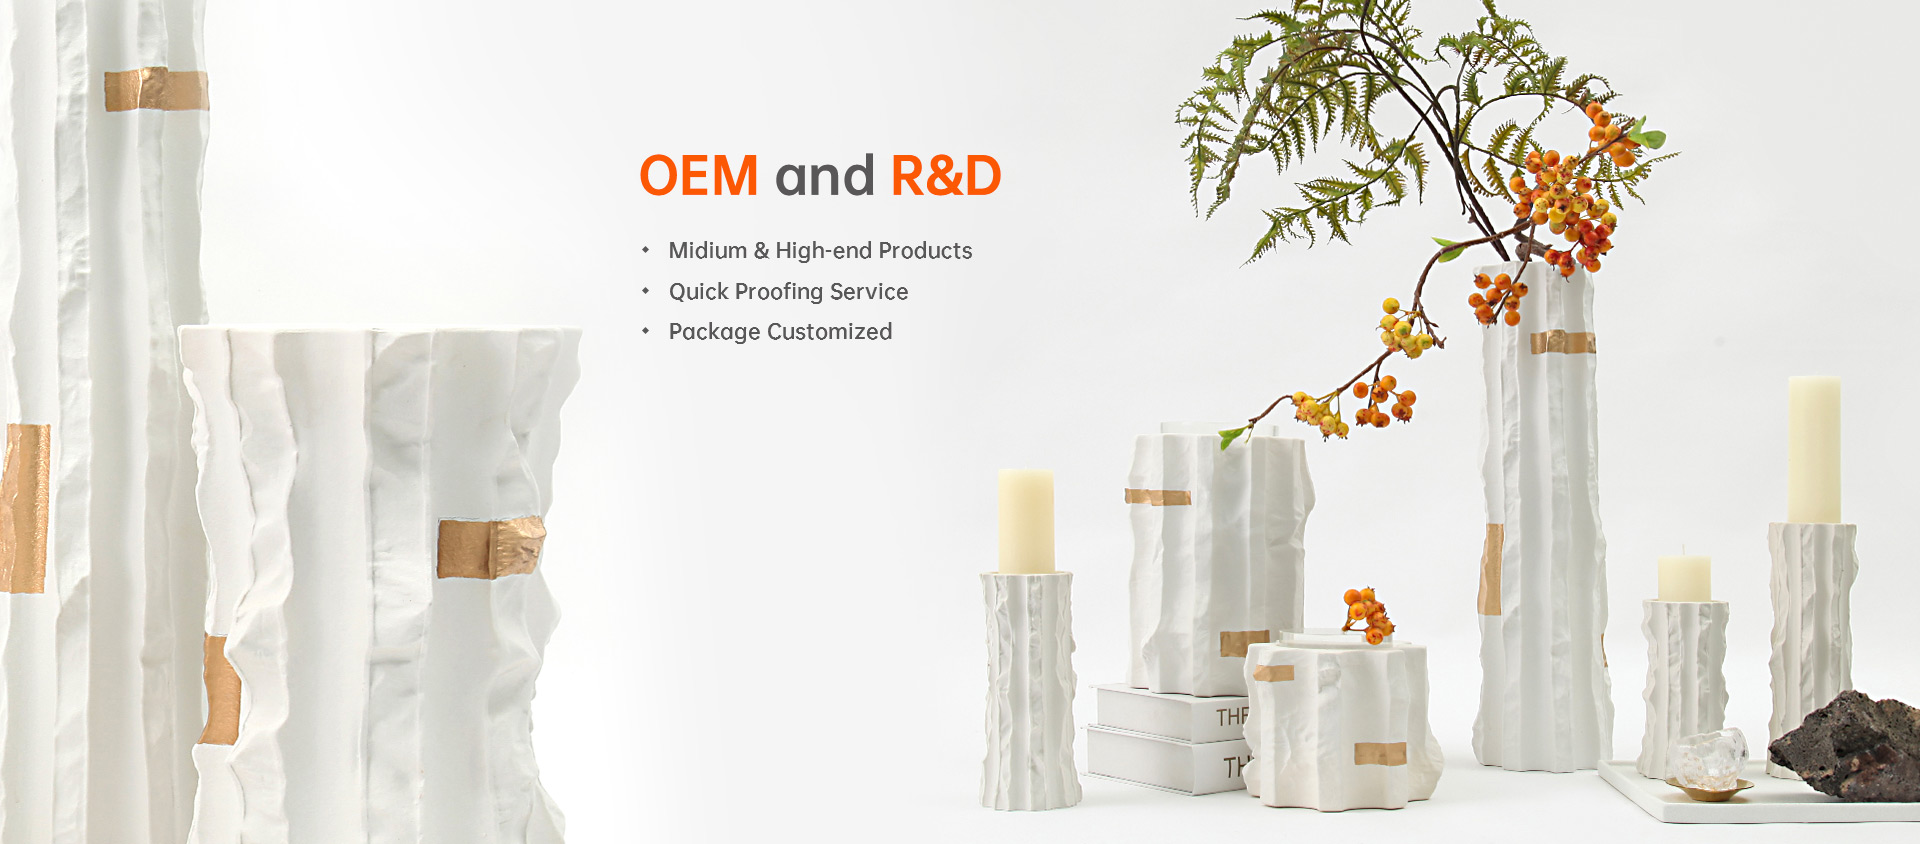 OEM and R&D